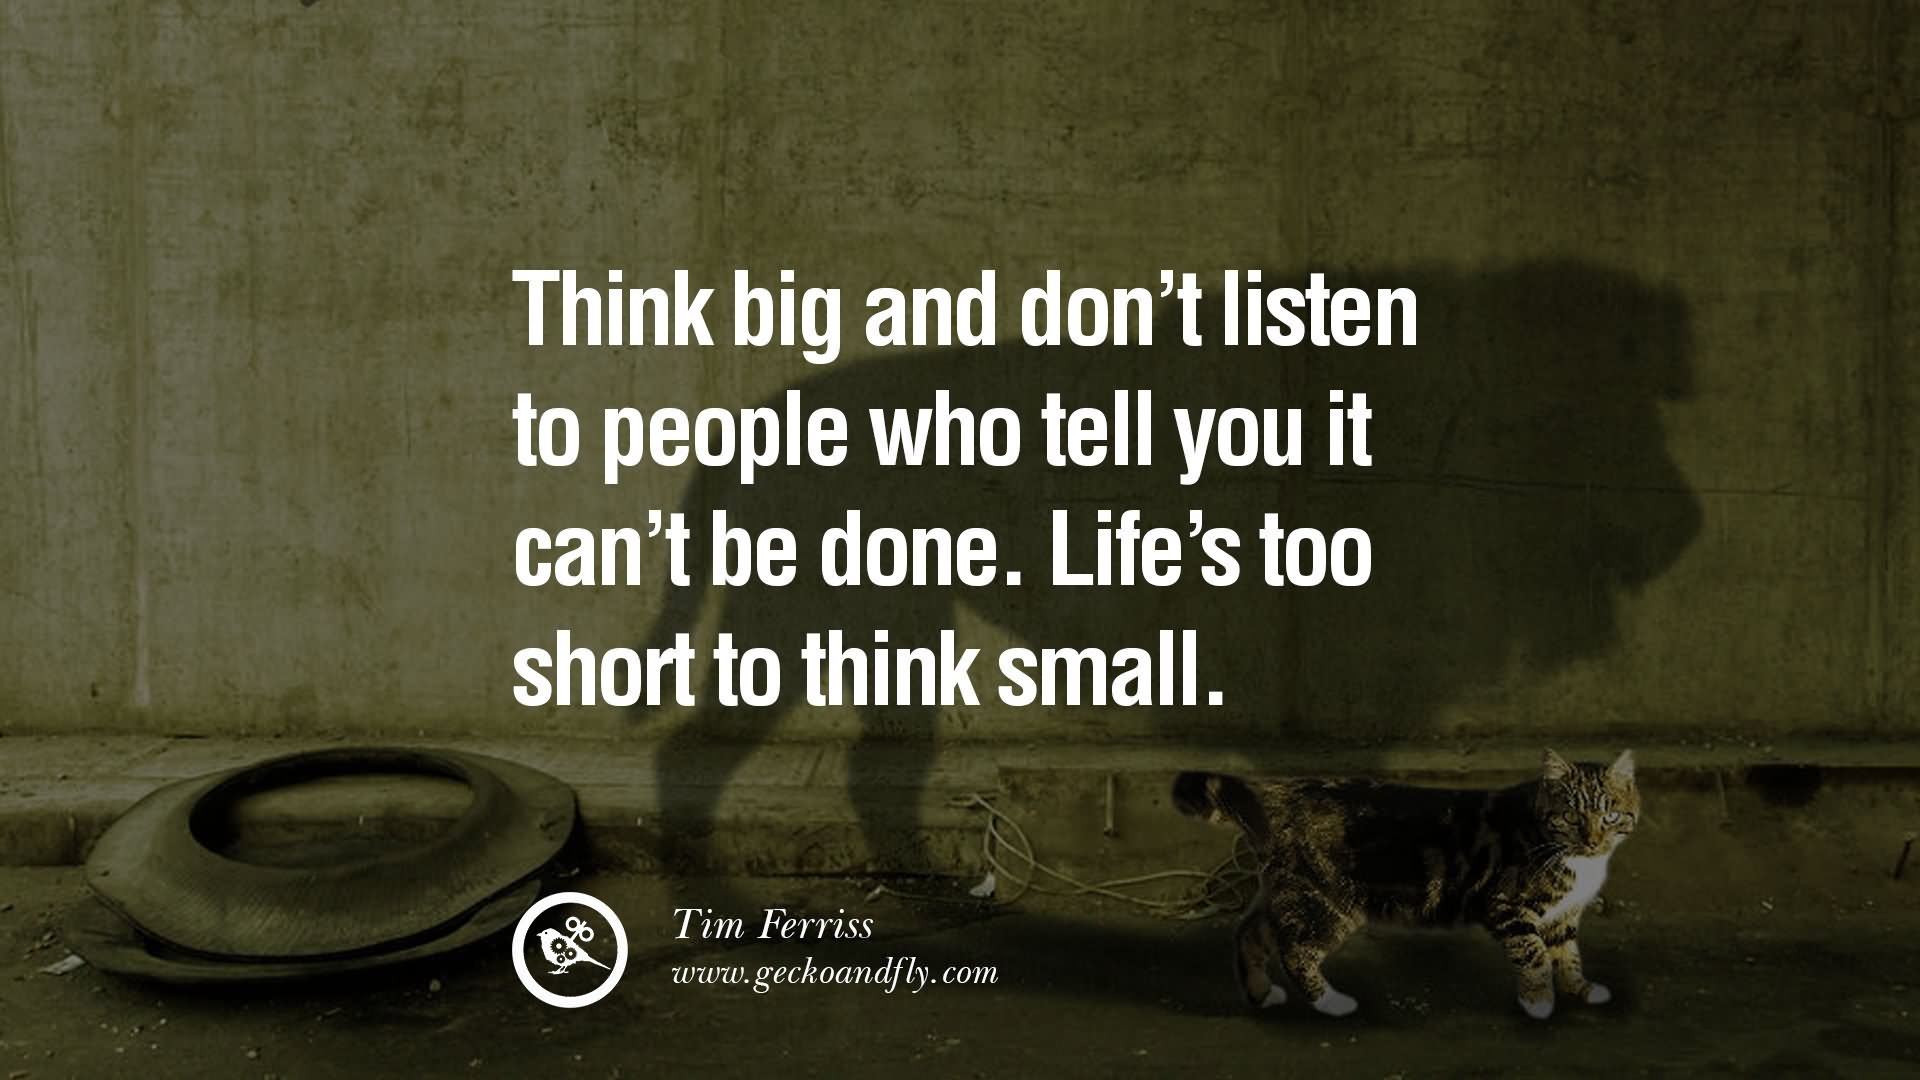 Think big and don’t listen to people who tell you it can’t be done. Life’s too short to think small.